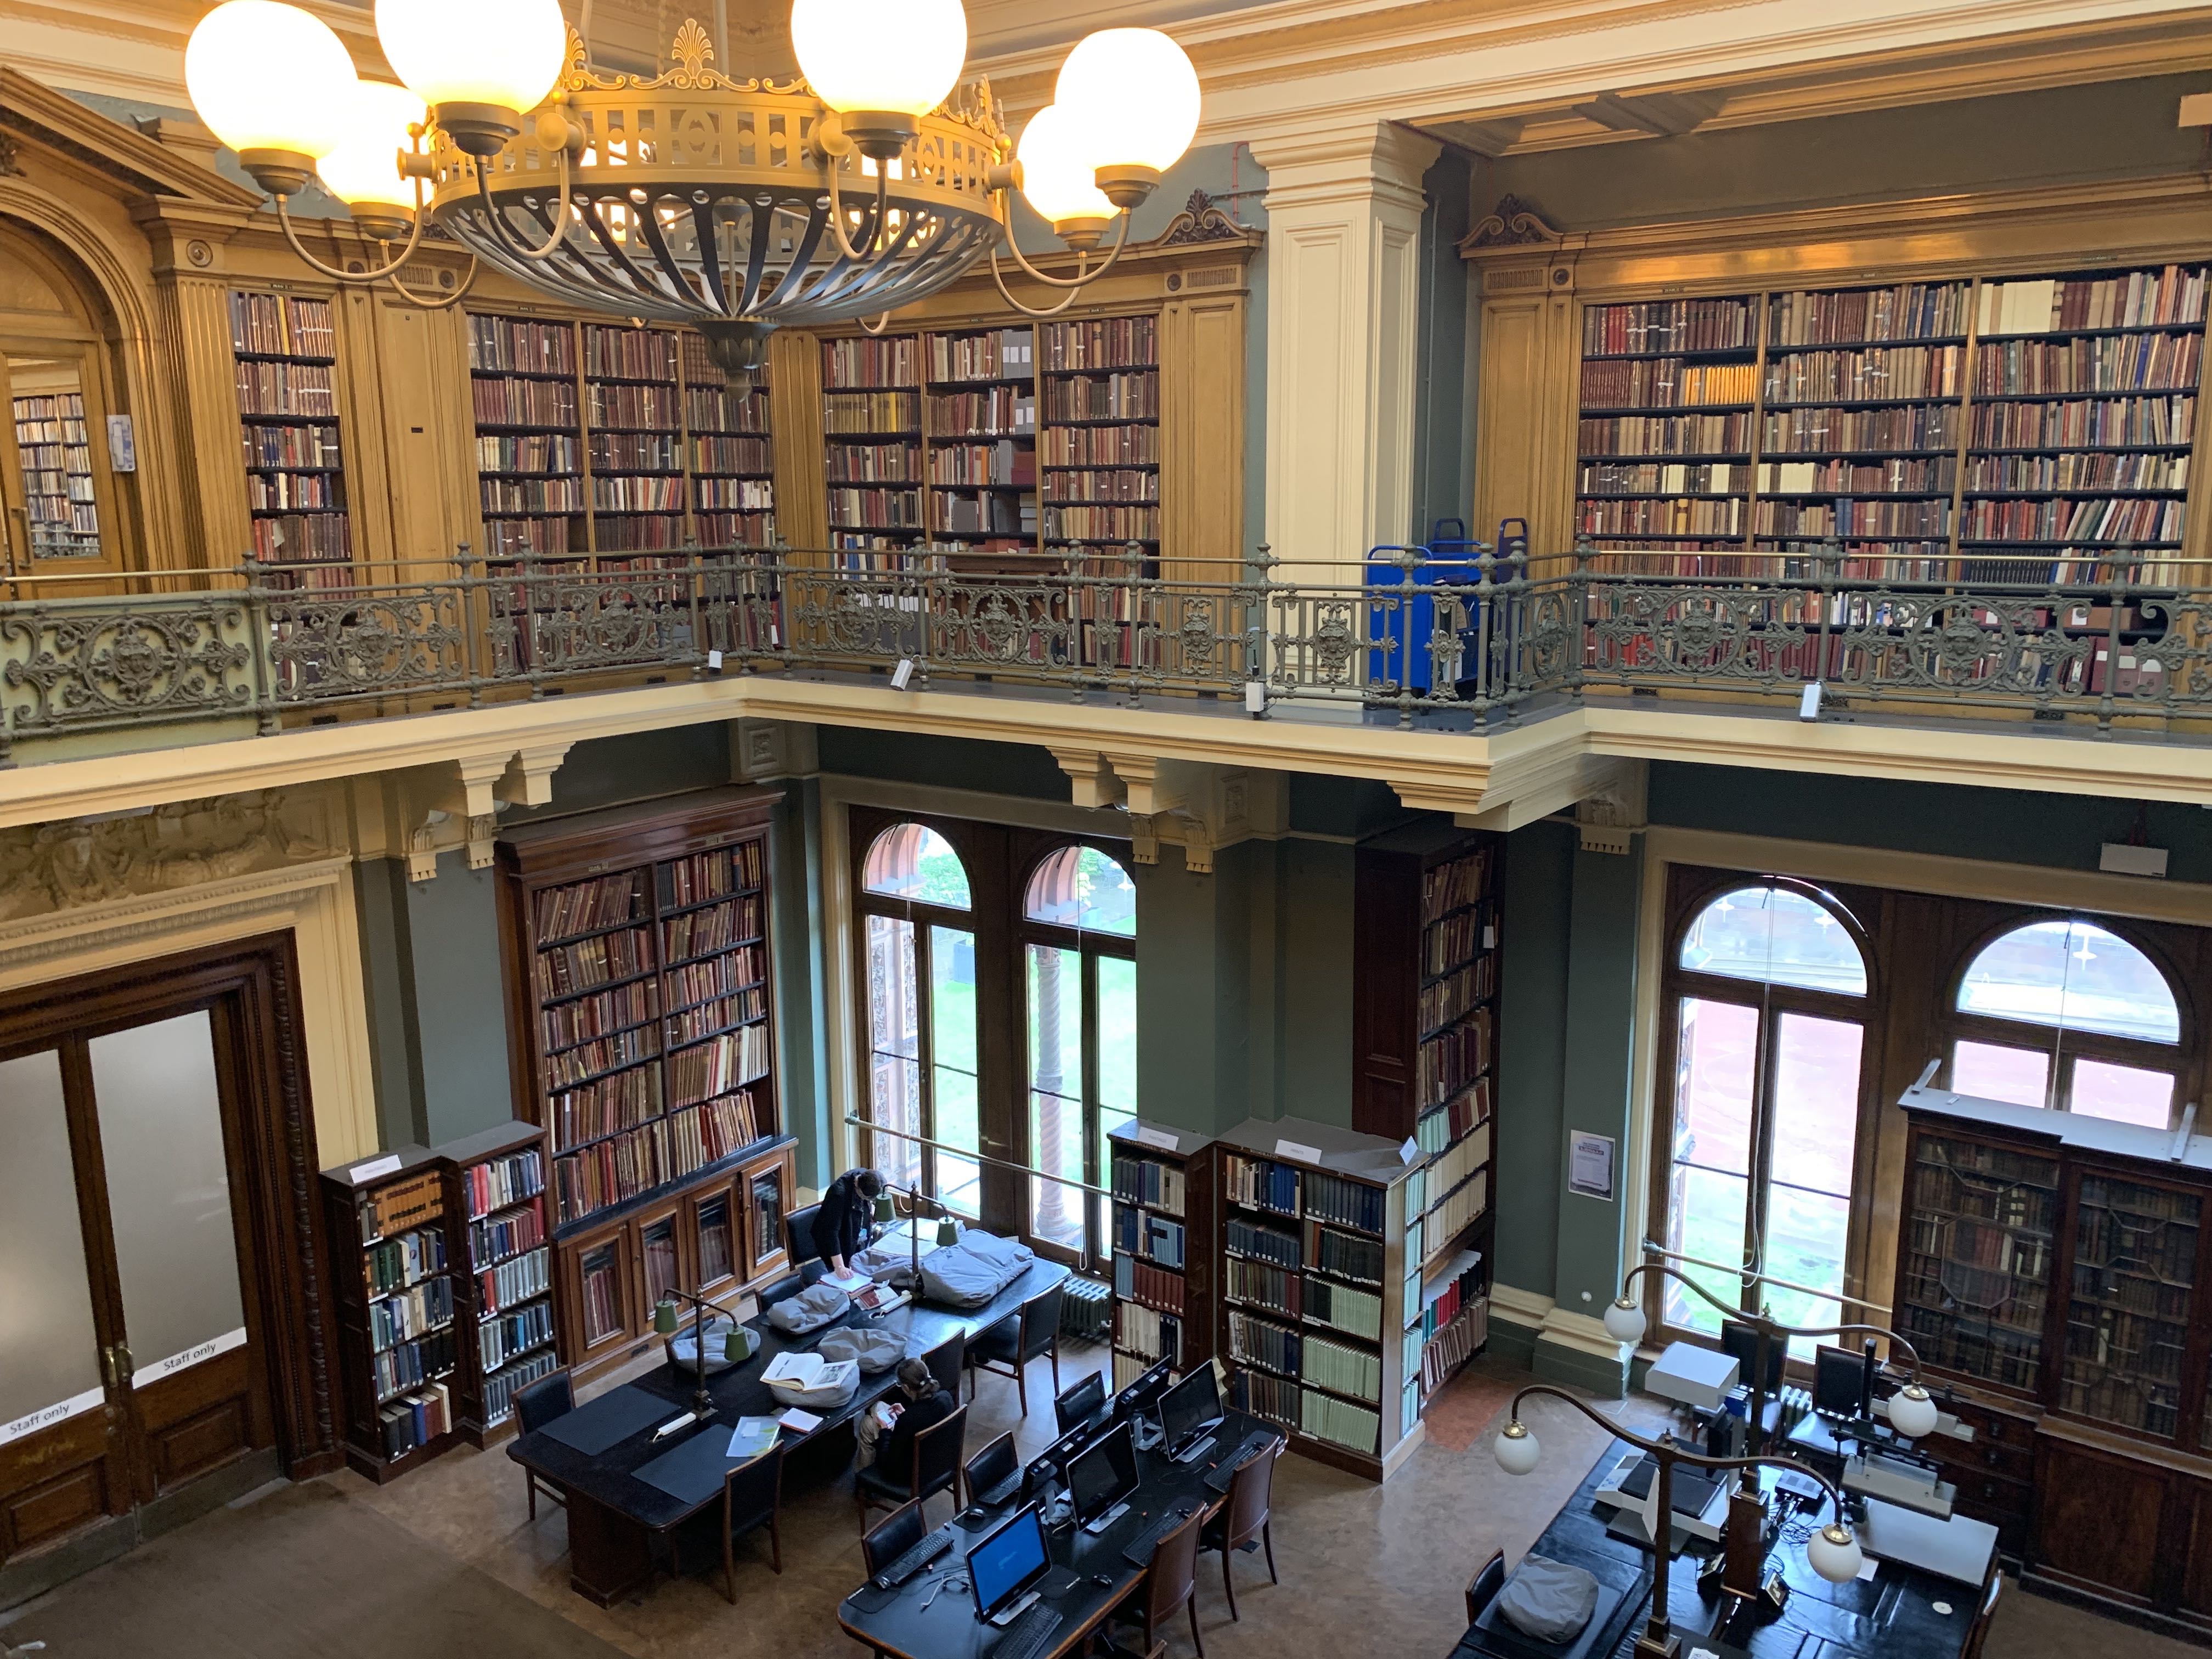 Interior of the two-level reading room of the National Art Library at the Victoria and Albert Museum